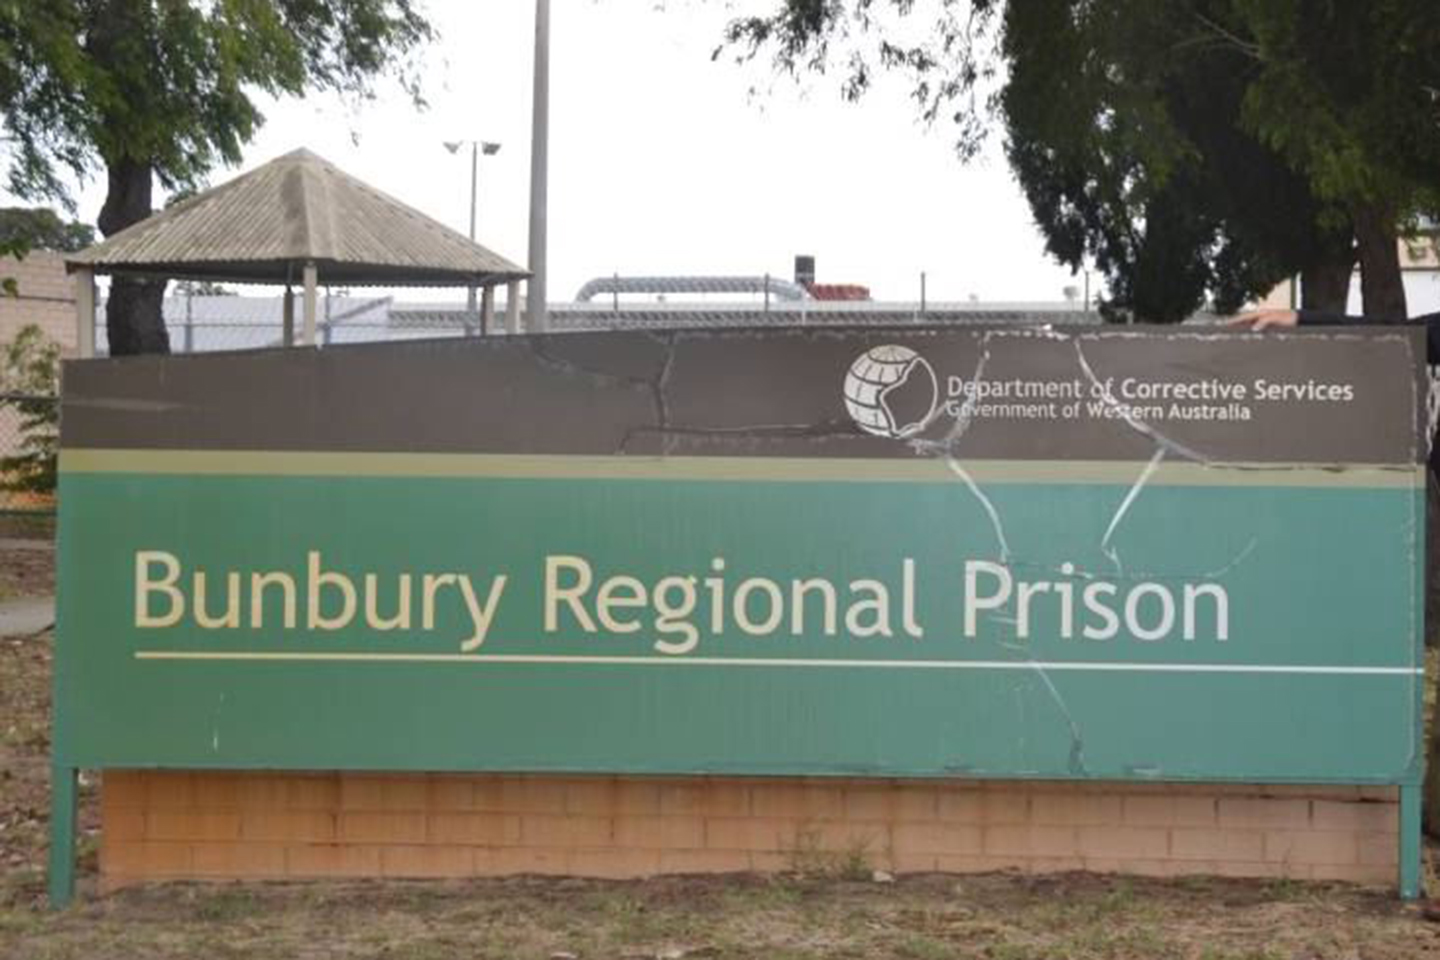 BREAKING: Drug discovery sparks search of Bunbury Regional Prison